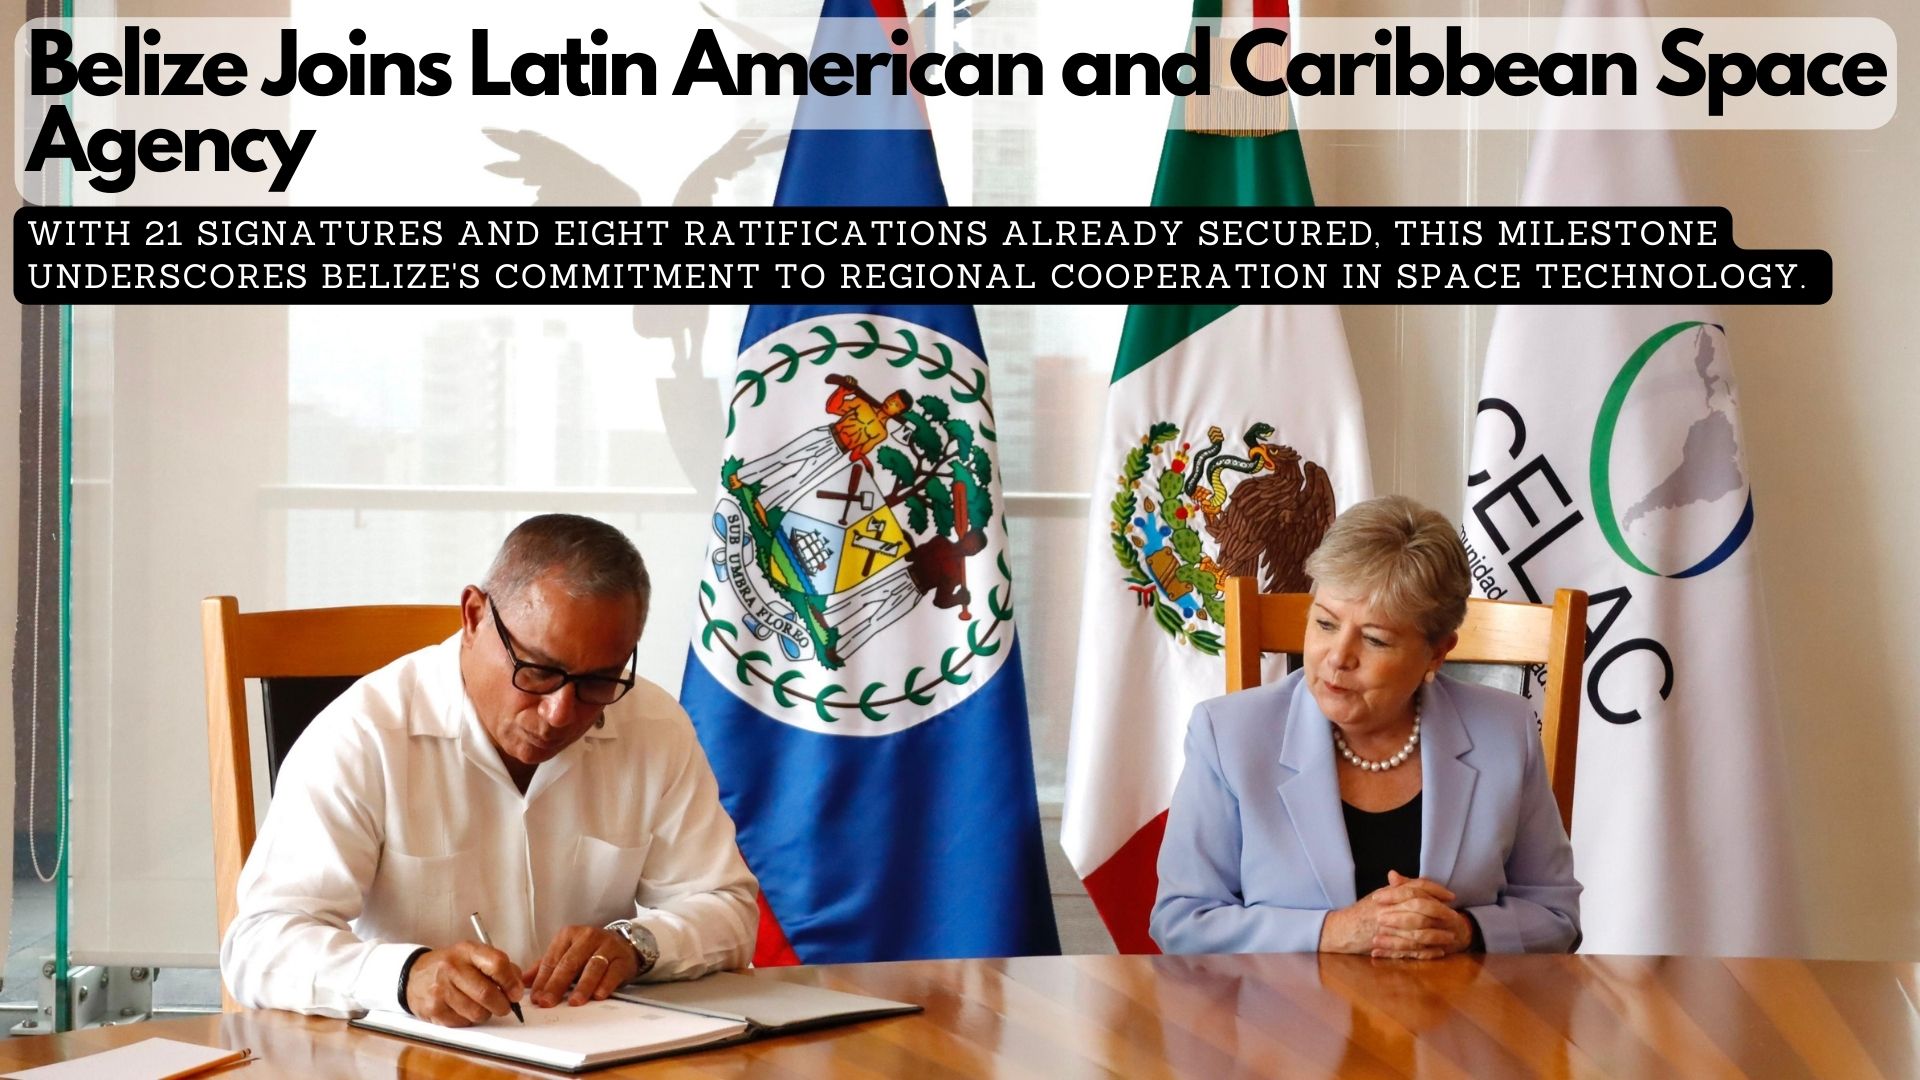 Foreign Secretary Alicia Bárcena is witness of honor at signing of ALCE agreement by Belize